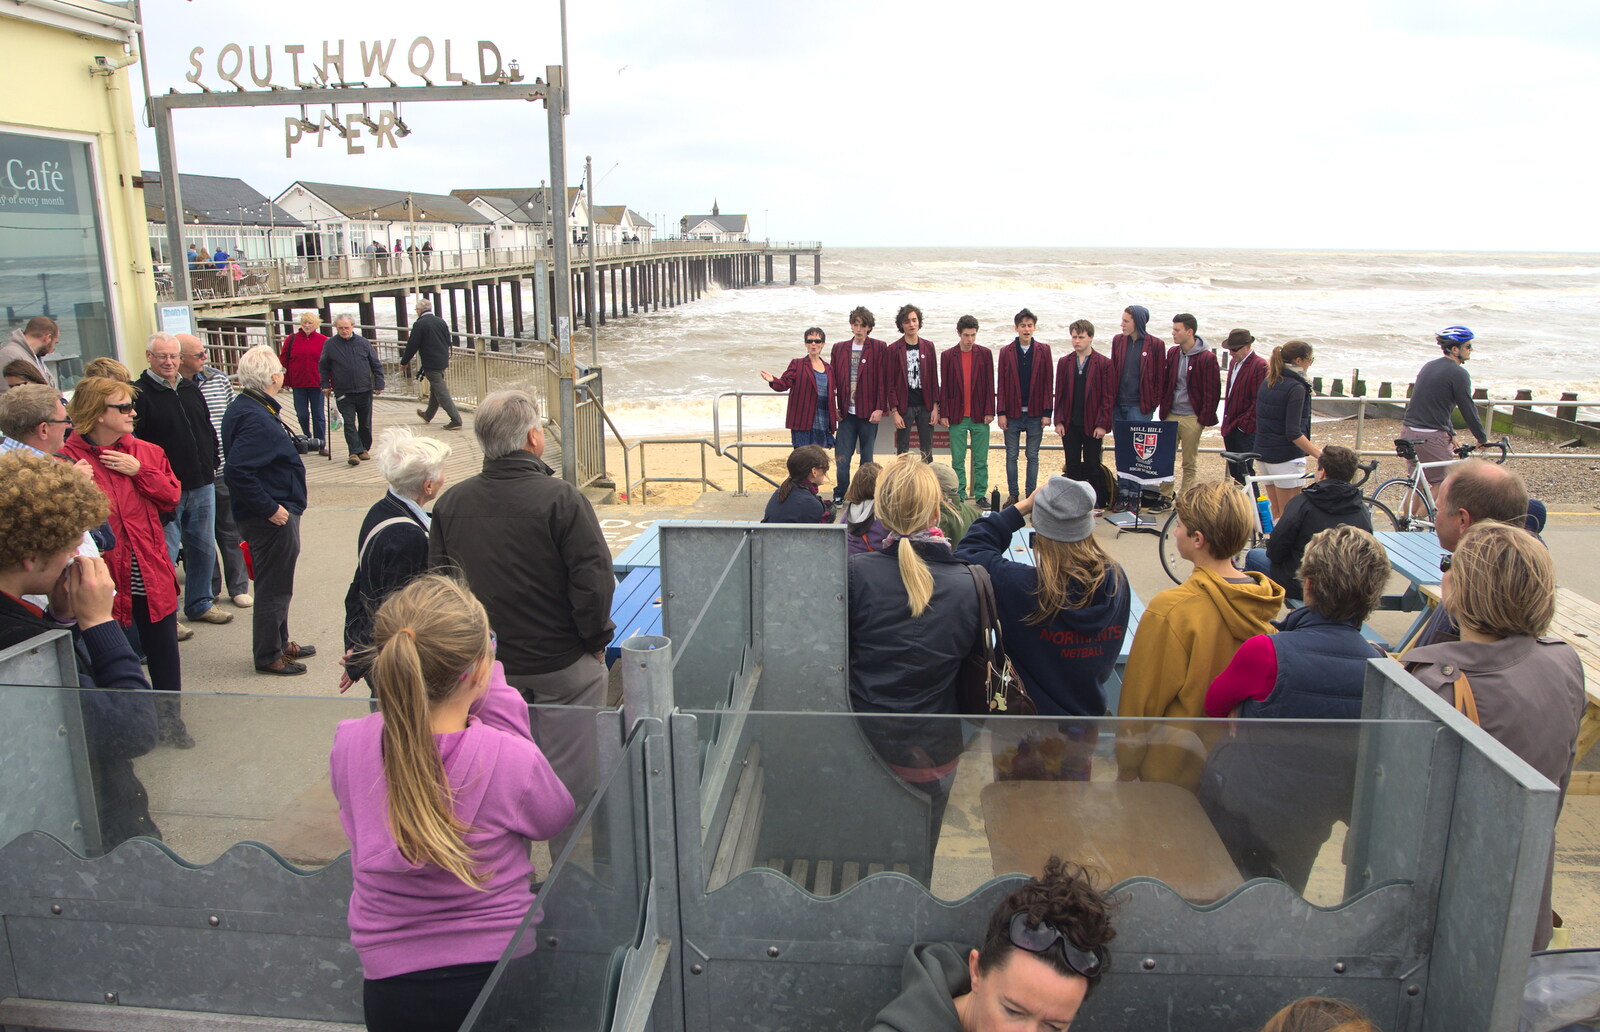 The promenade crowds watch the barbershop choir from Southwold By The Sea, Suffolk - 29th September 2013